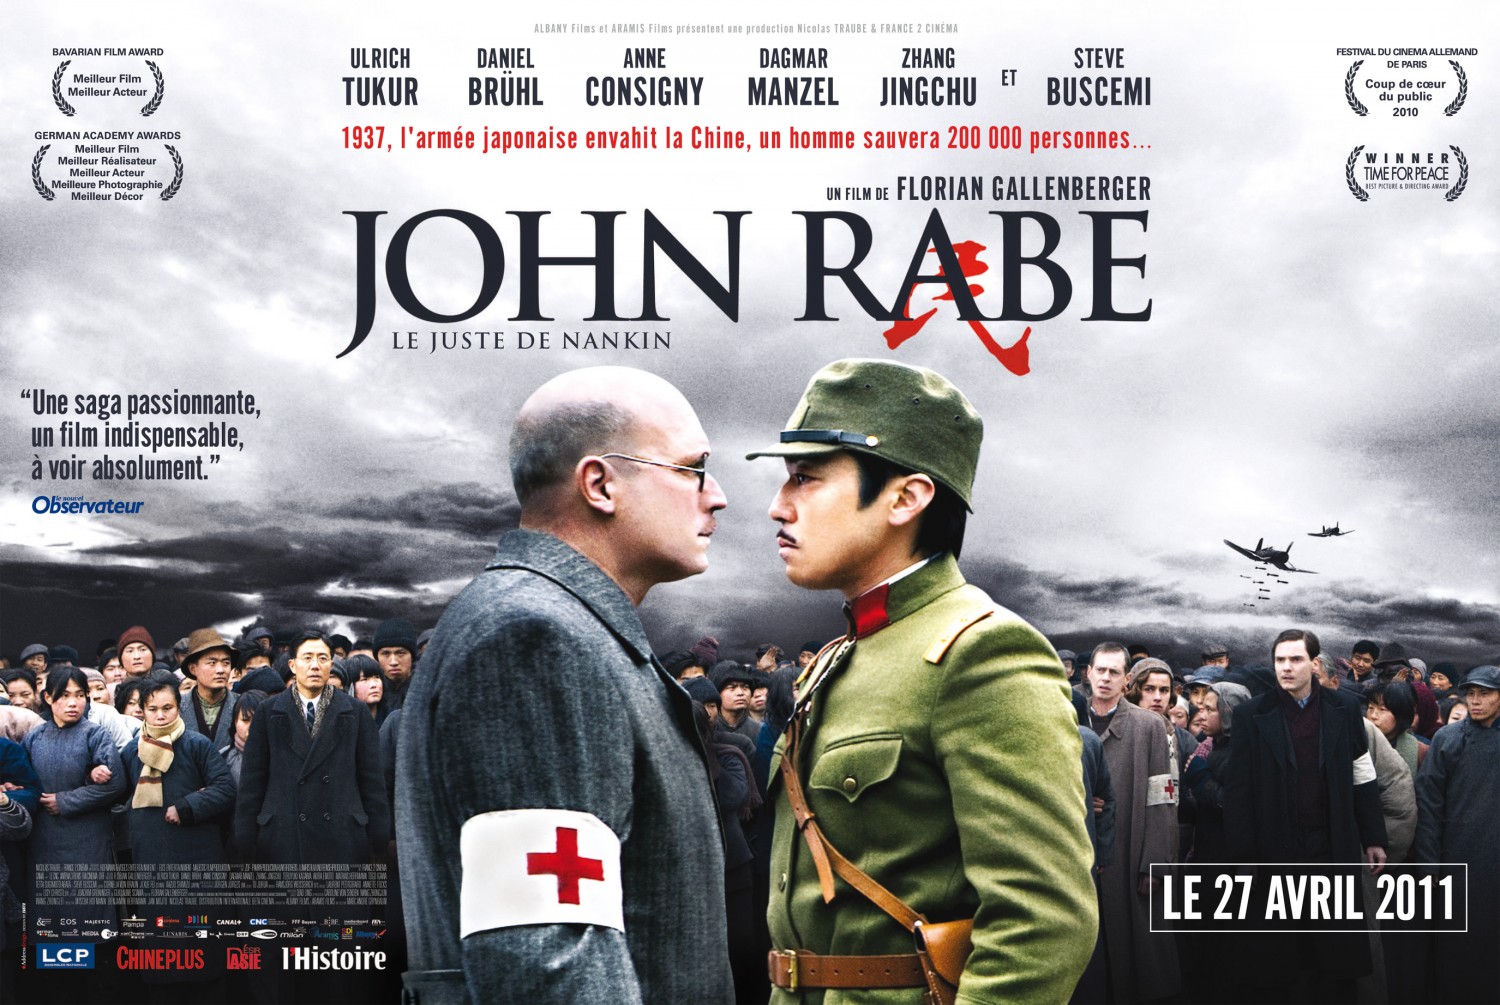 Extra Large Movie Poster Image for John Rabe (#5 of 5)